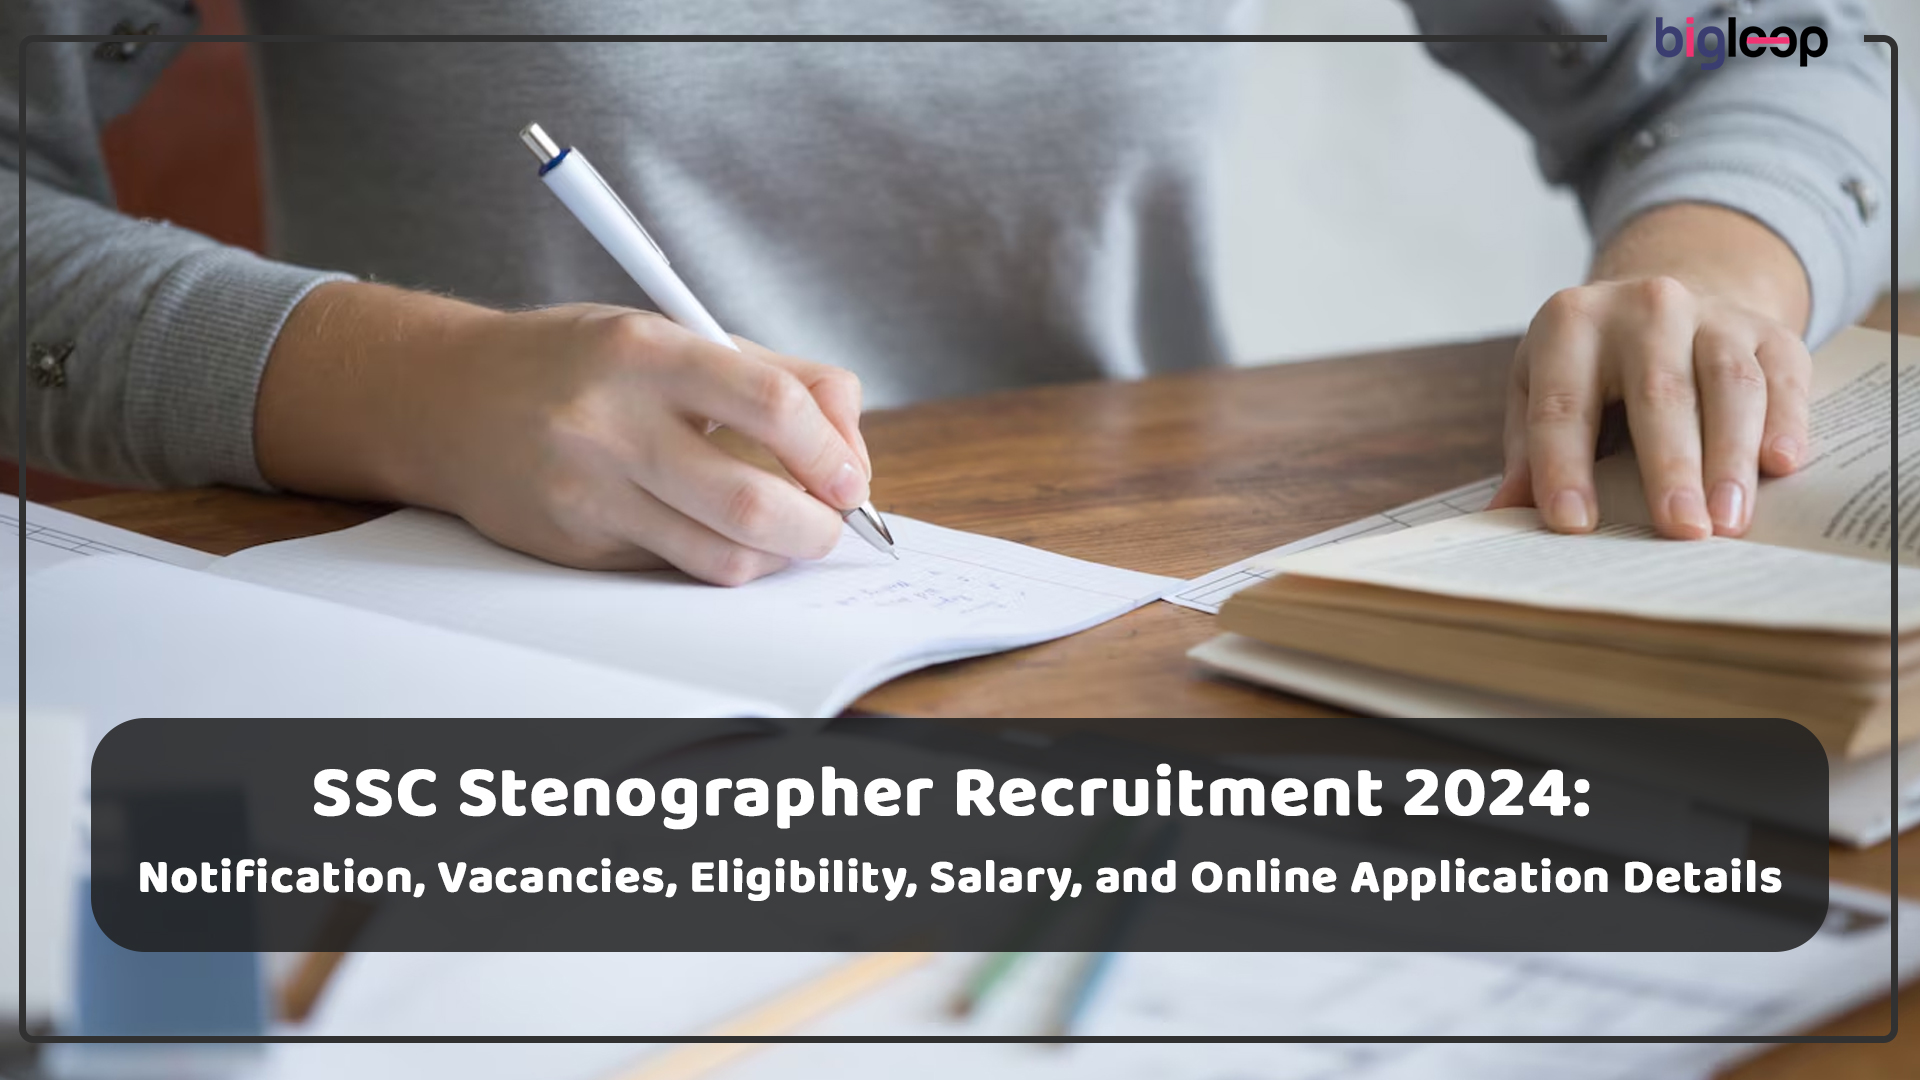 SSC Stenographer Recruitment 2024: Notification, Vacancies, Eligibility, Salary, and Online Application Details